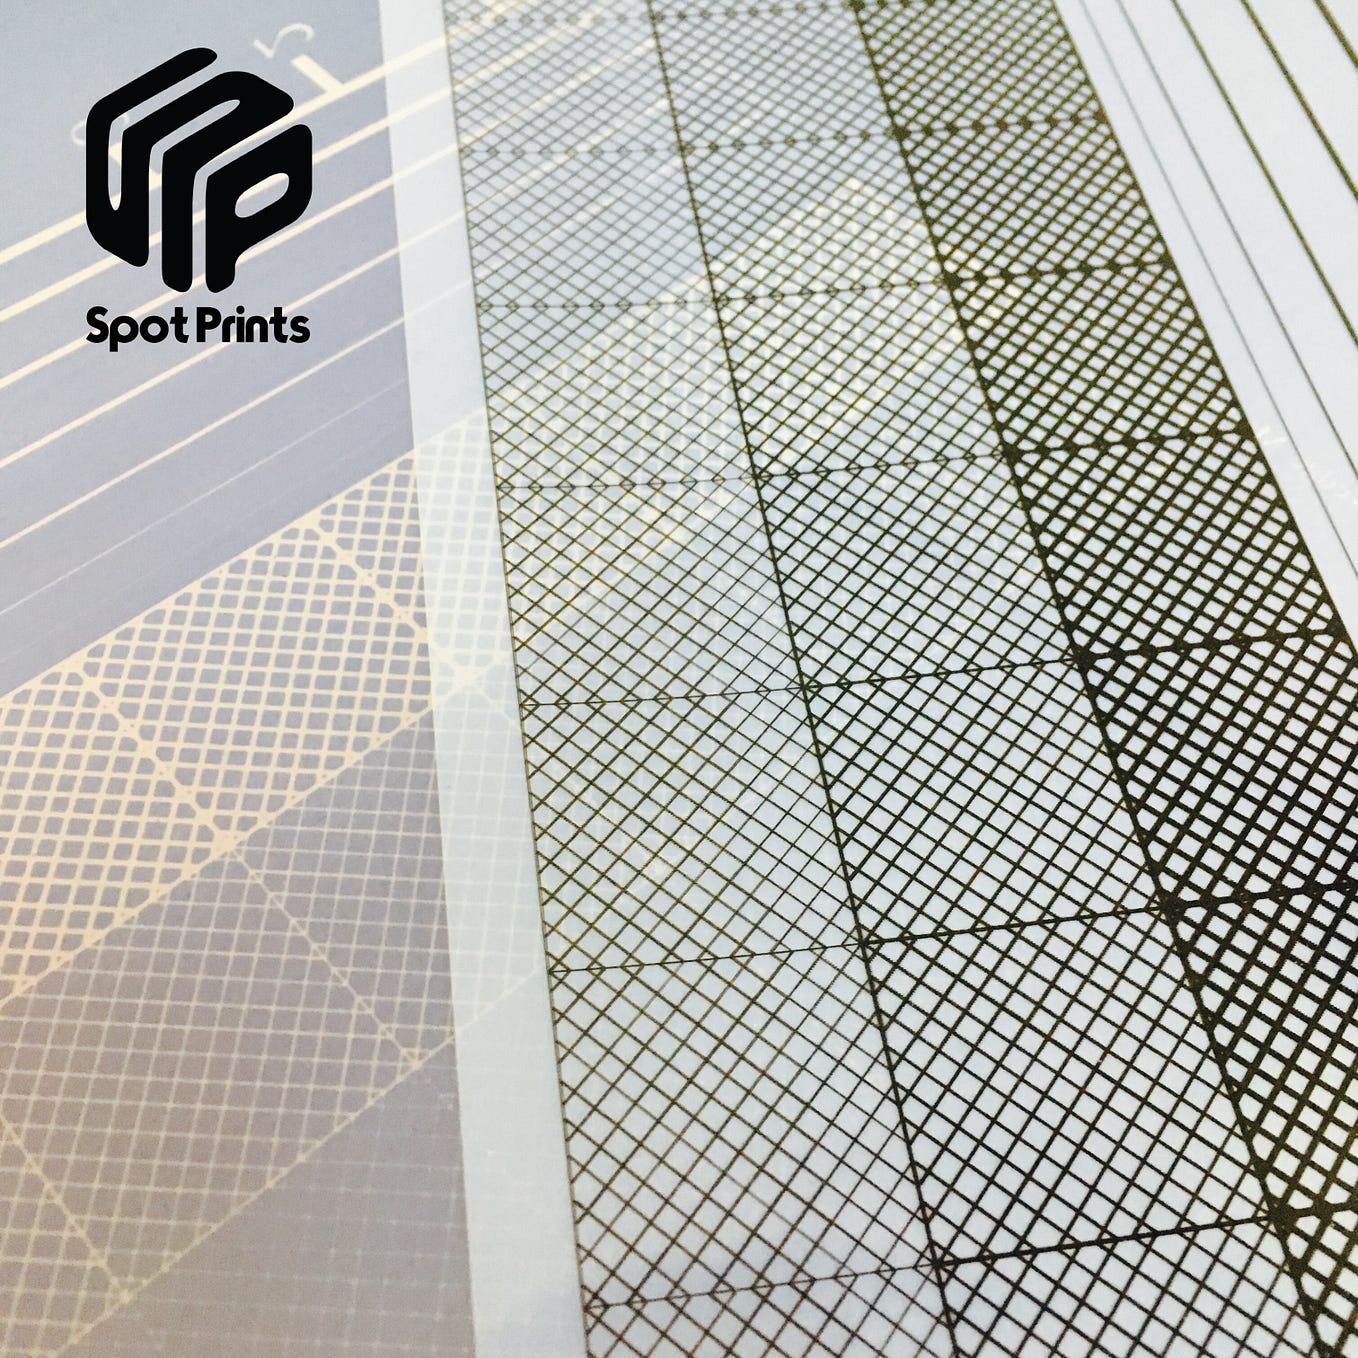 How to Select the Right Mesh for Screen Printing